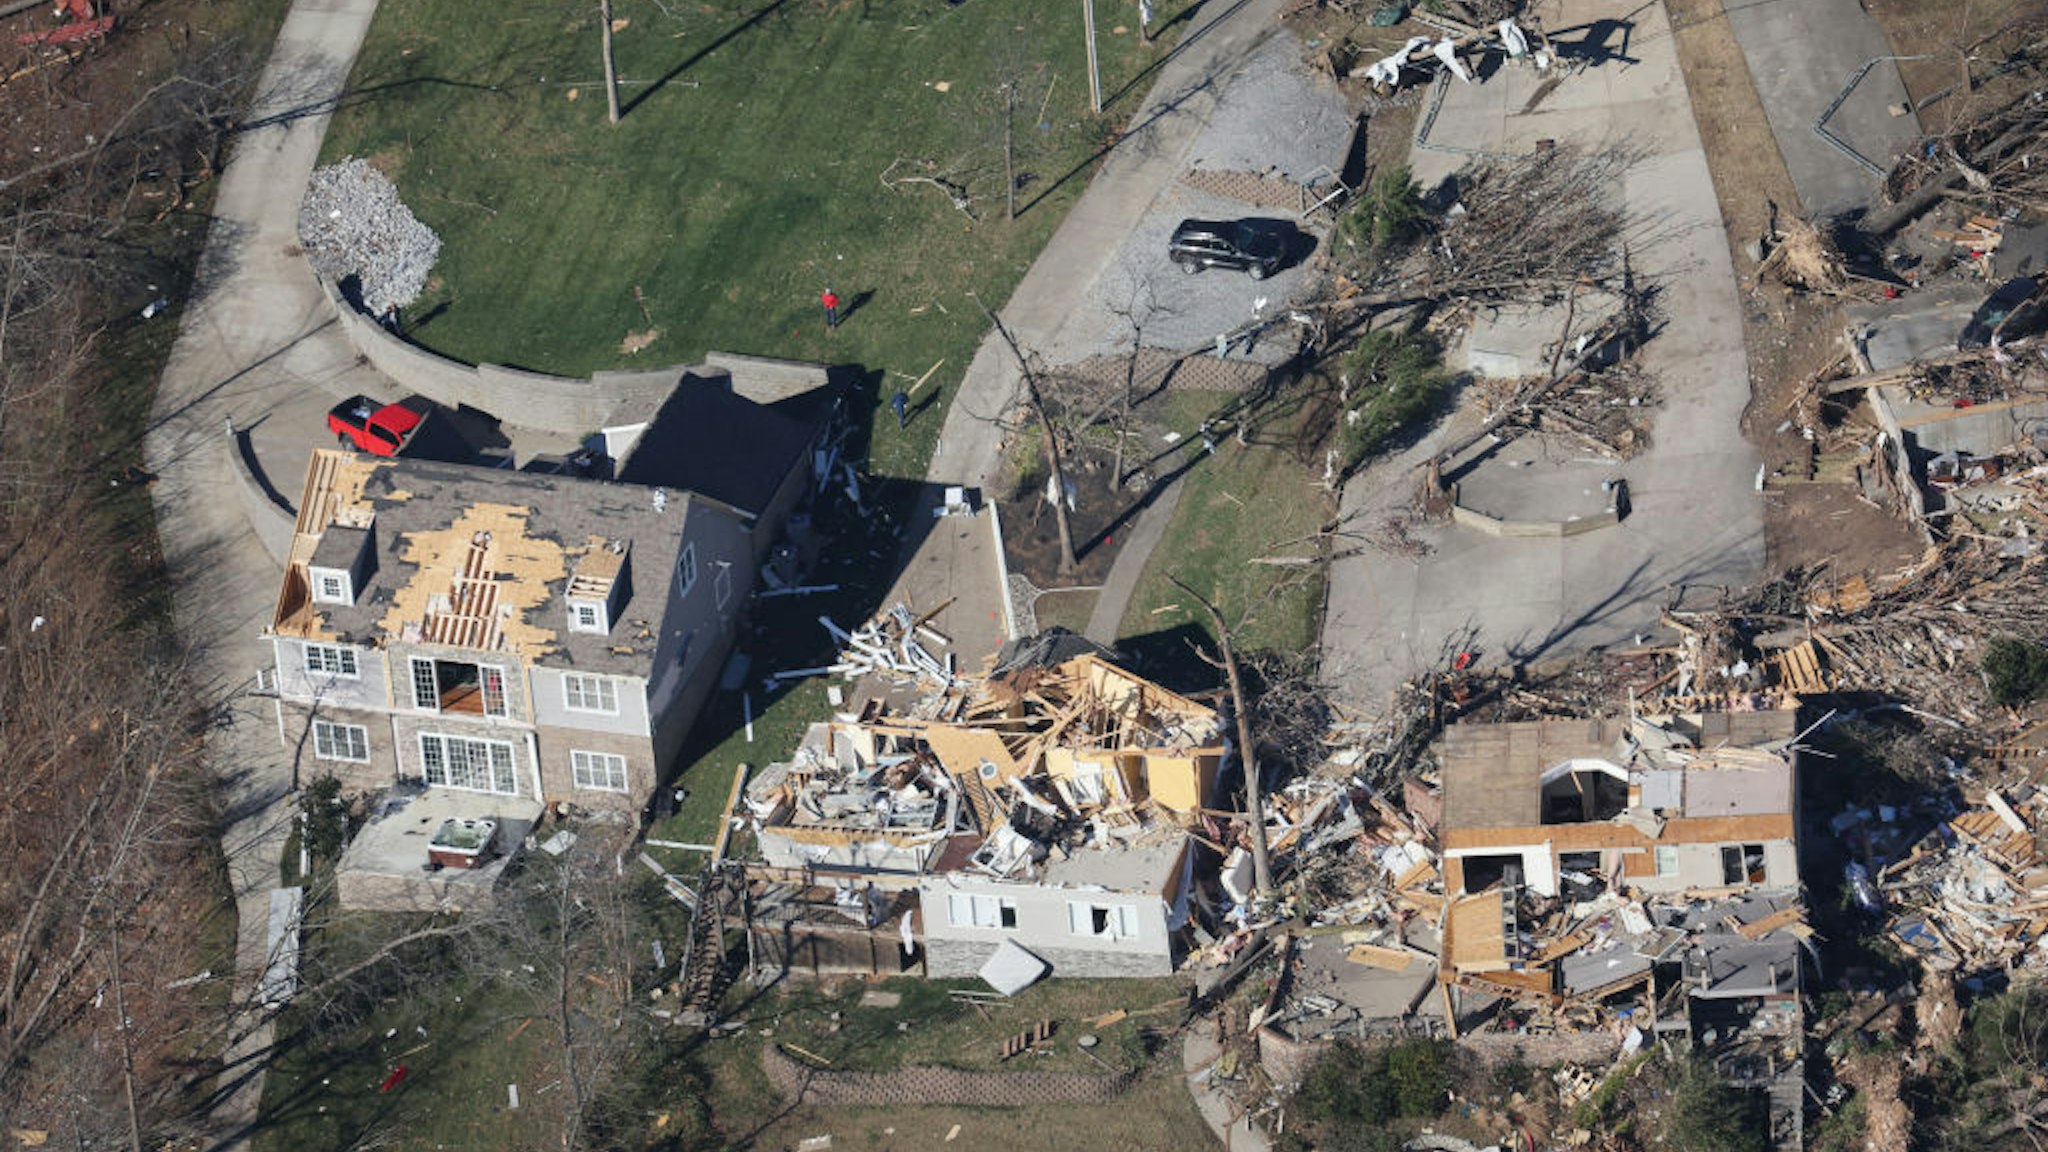 In this aerial view, homes and surrounding area are heavily damaged after they were hit by a tornado three days prior, on December 13, 2021 near Calvert City, Kentucky.